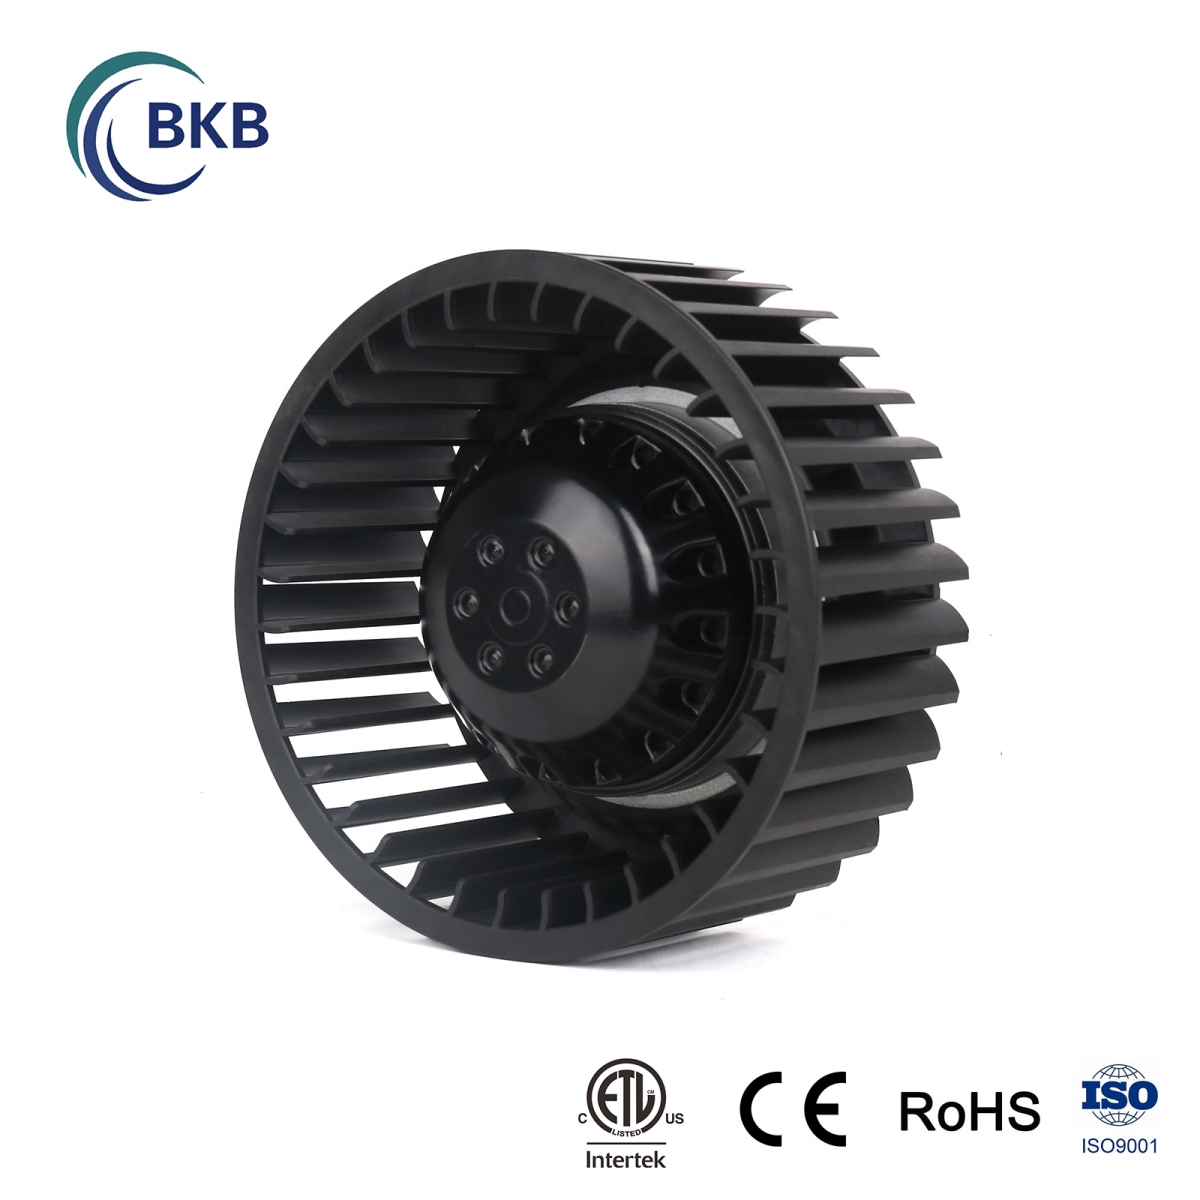 Plastic forward curved centrifugal fans Φ160-SUNLIGHT BLOWER,Centrifugal Fans, Inline Fans,Motors,Backward curved centrifugal fans ,Forward curved centrifugal fans ,inlet fans, EC fans